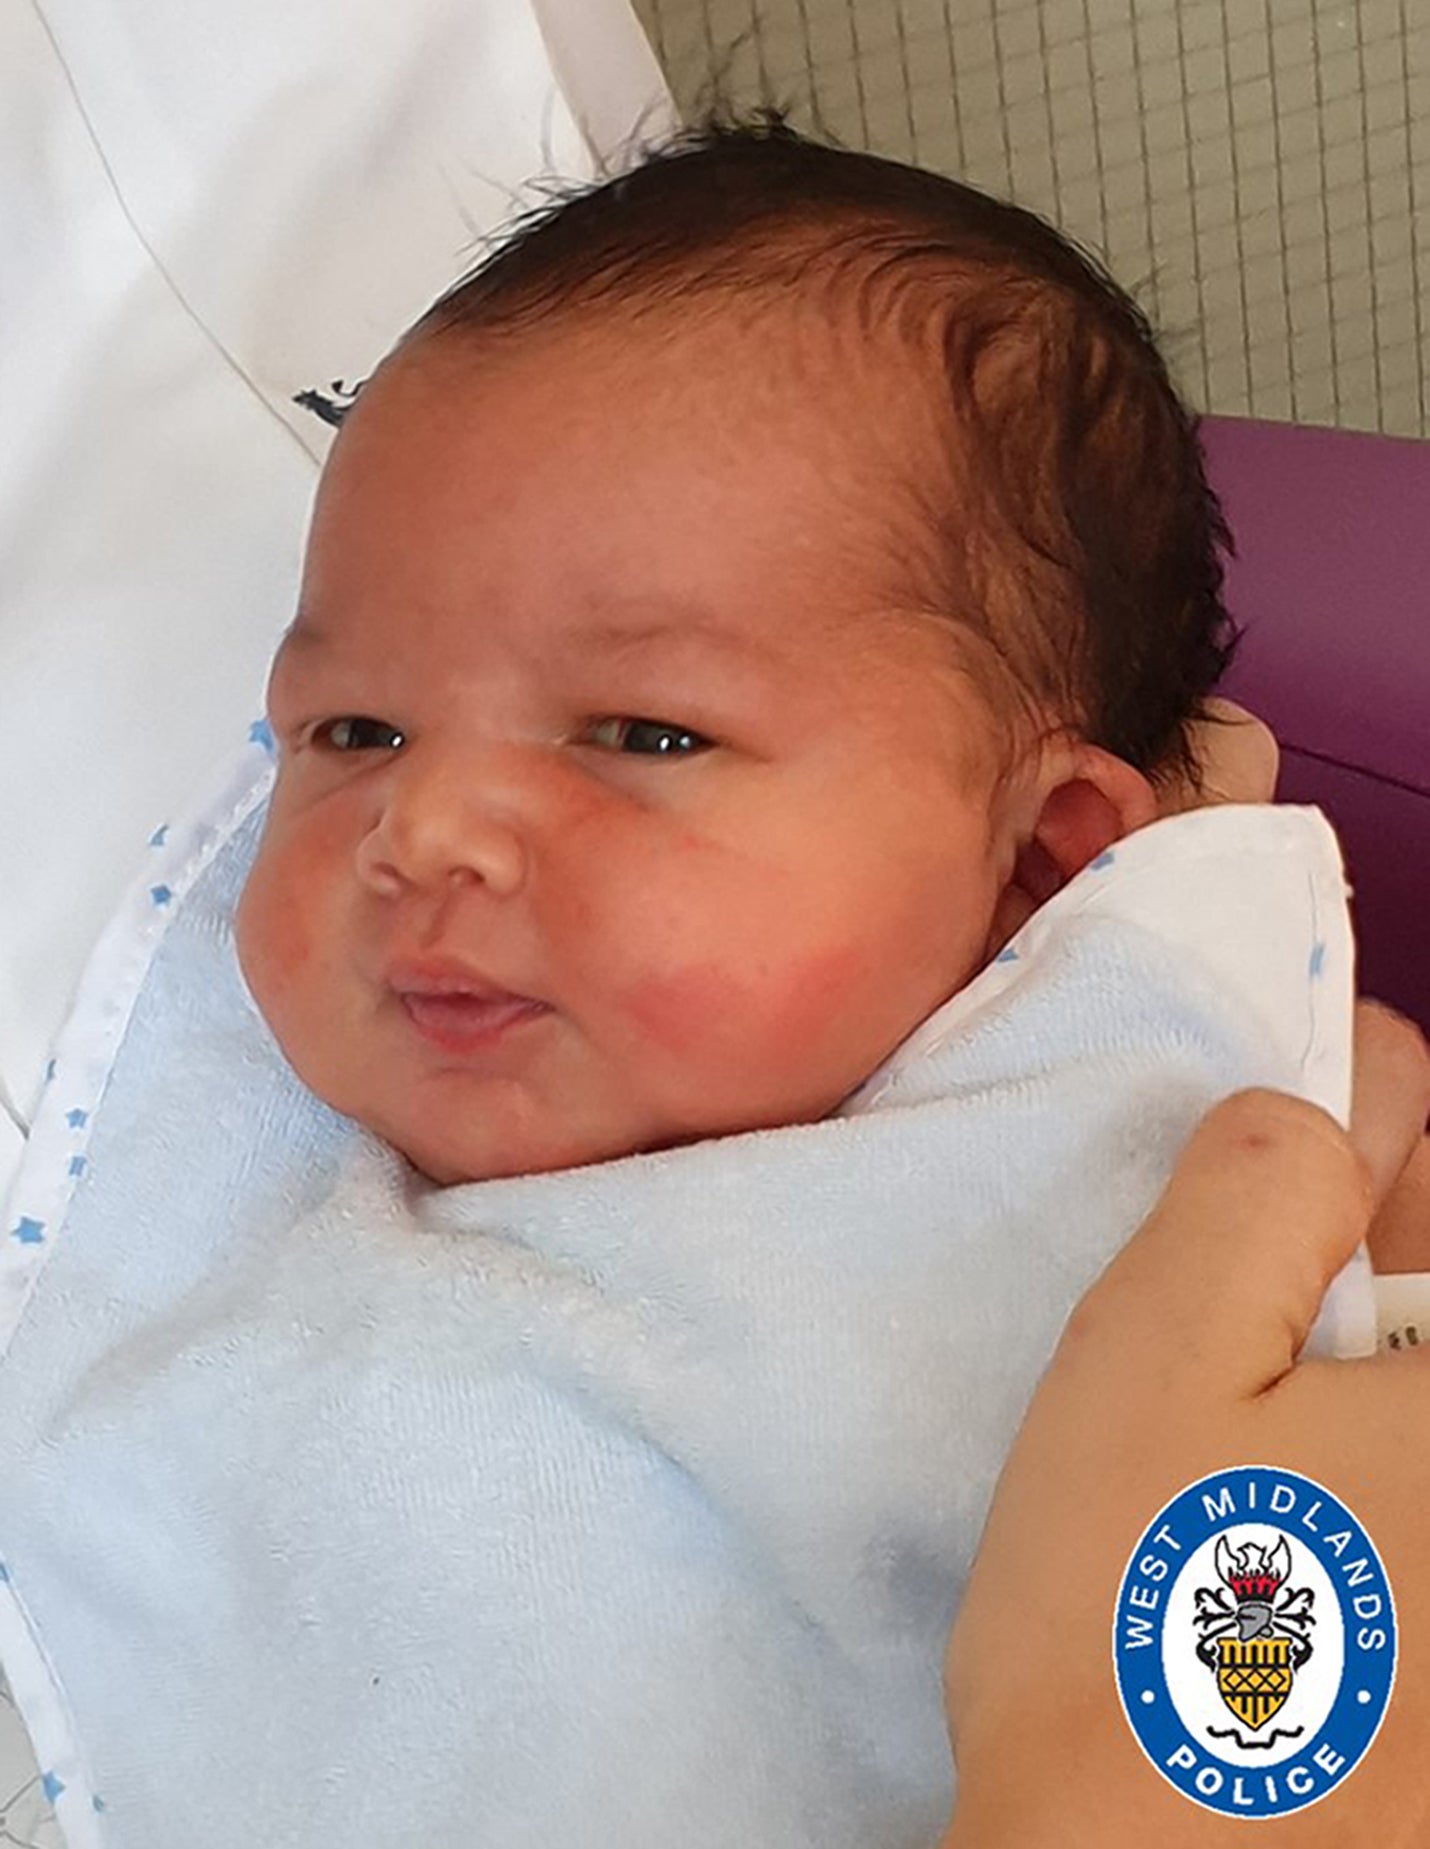 The mother of a newborn baby found abandoned in a park has been tracked down after an eight-month search (West Midlands Police/PA)